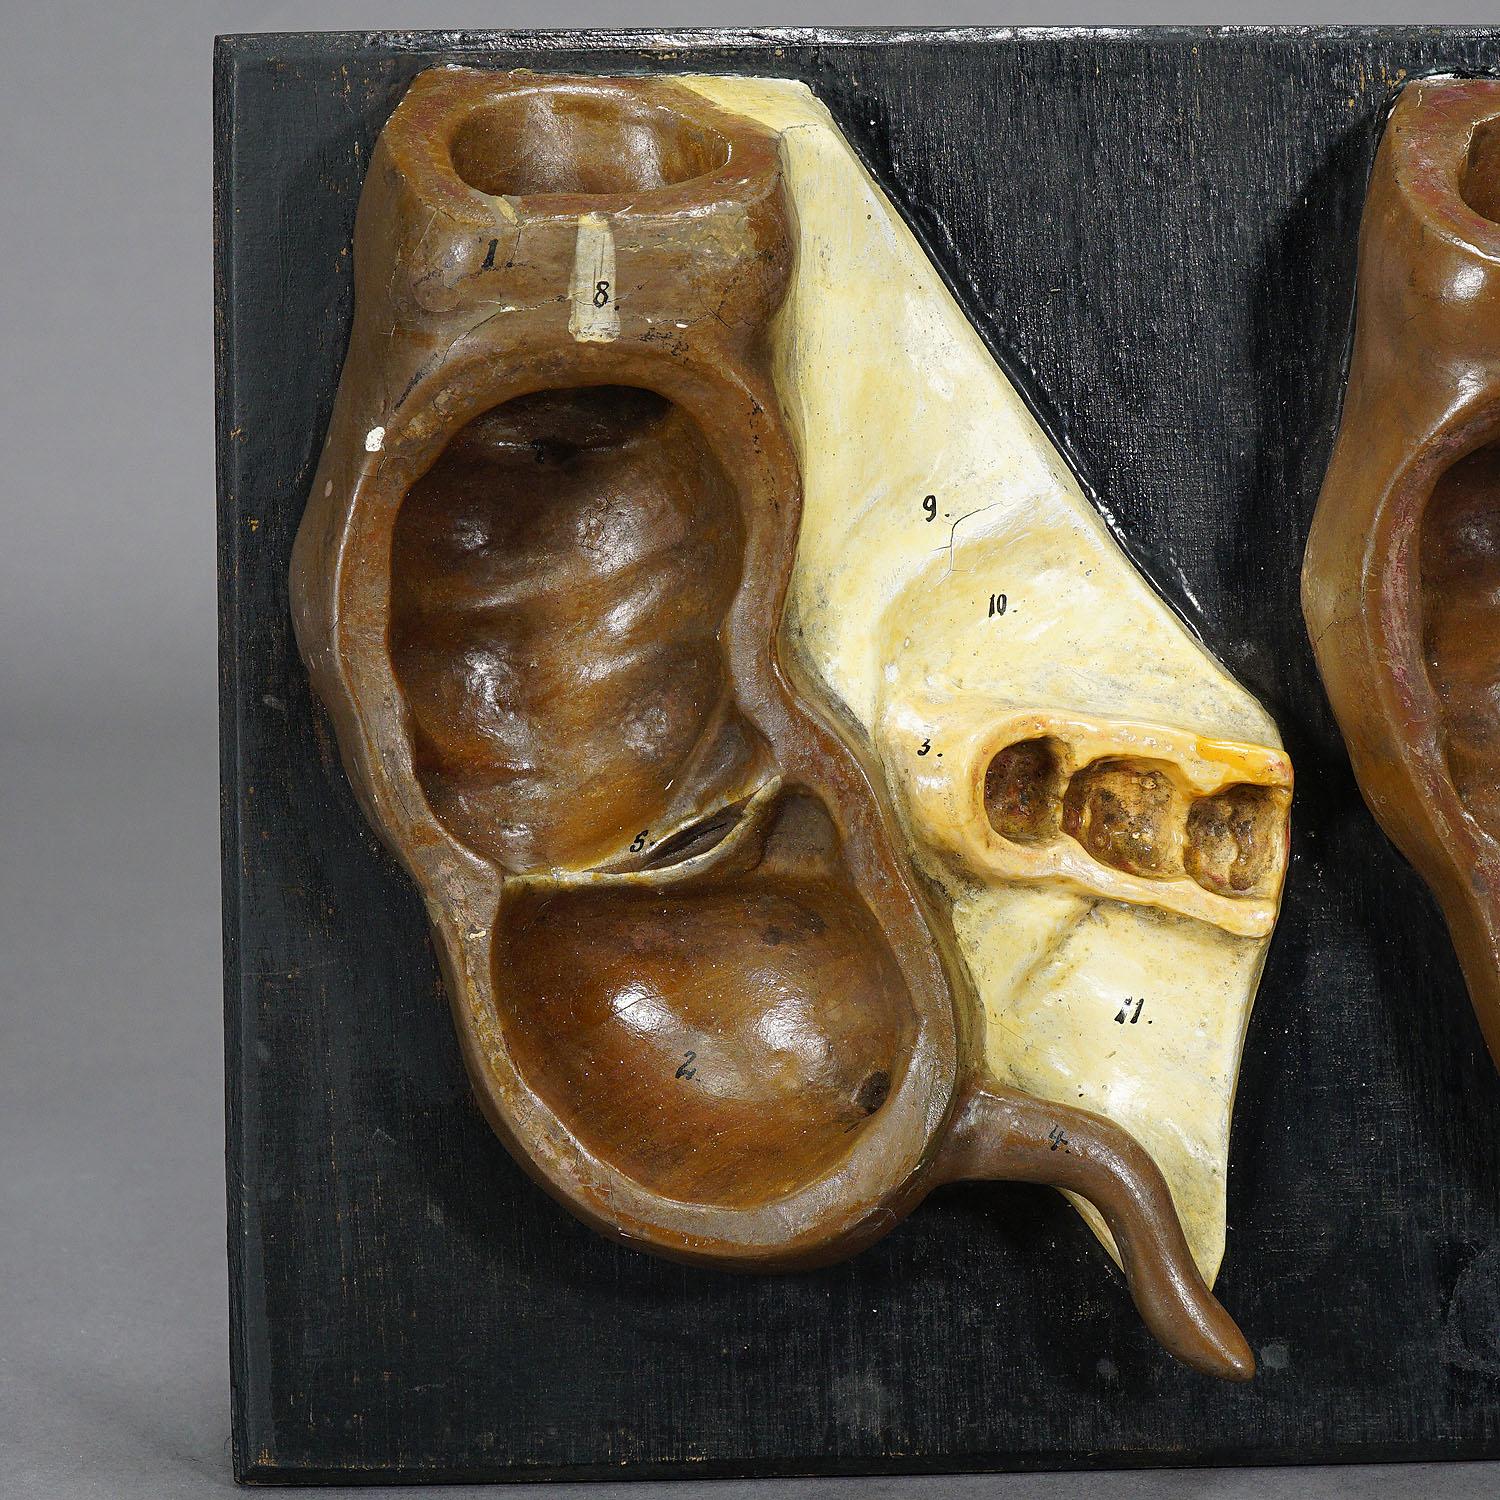 A great antique hand-painted anatomical model of the appendix in different stages. It is made of plaster and mounted on a wooden base. Manufactured most probably by SOMSO or PHYWE, Germany ca. 1900. Very good condition. 

Measures: Width: 18.31